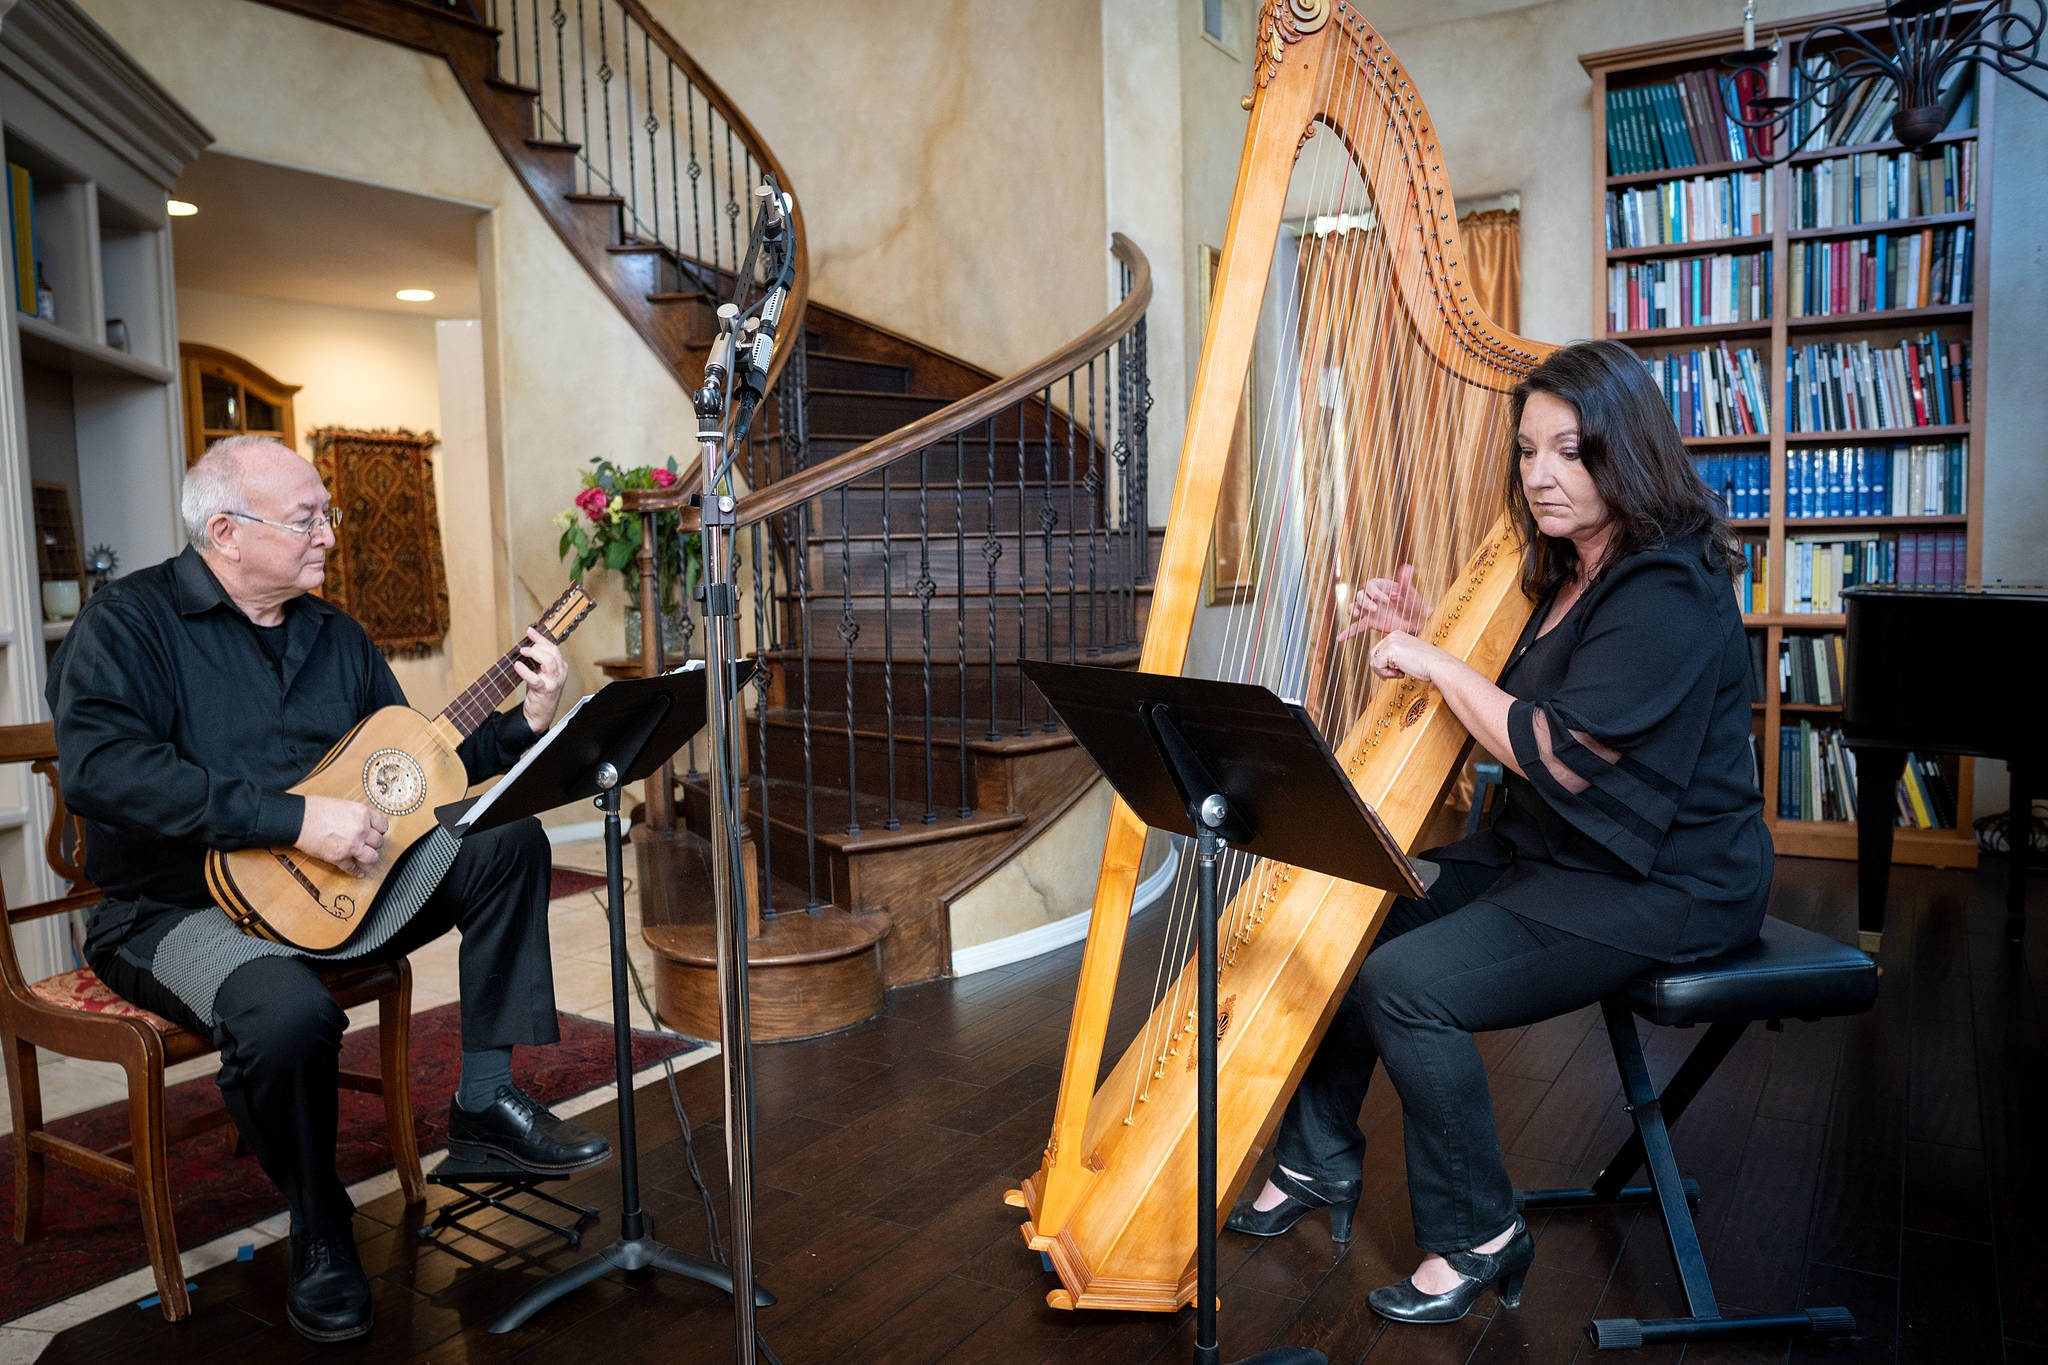 Photo by Gary Payne
Harpist Maxine Eilander and guitarist Stephen Stubbs will be performing songs by Franz Schubert at this year's Whidbey Island Music Festival.